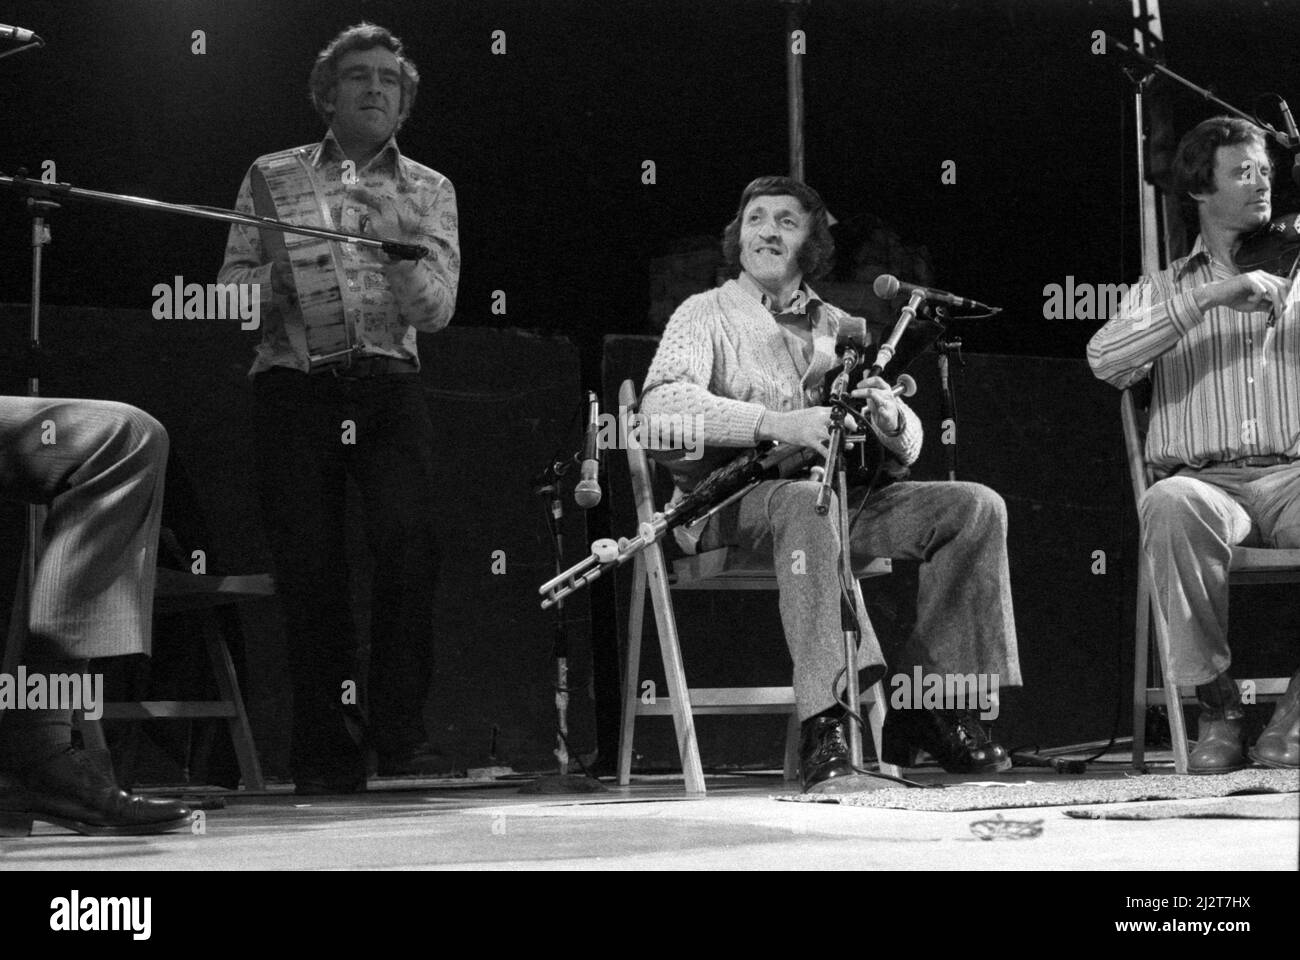 Seán Potts (left) and Paddy Moloney performing with The Chieftains at the July Wakes folk festival in Chorley, Lancashire, England on 25 July 1976. Stock Photo